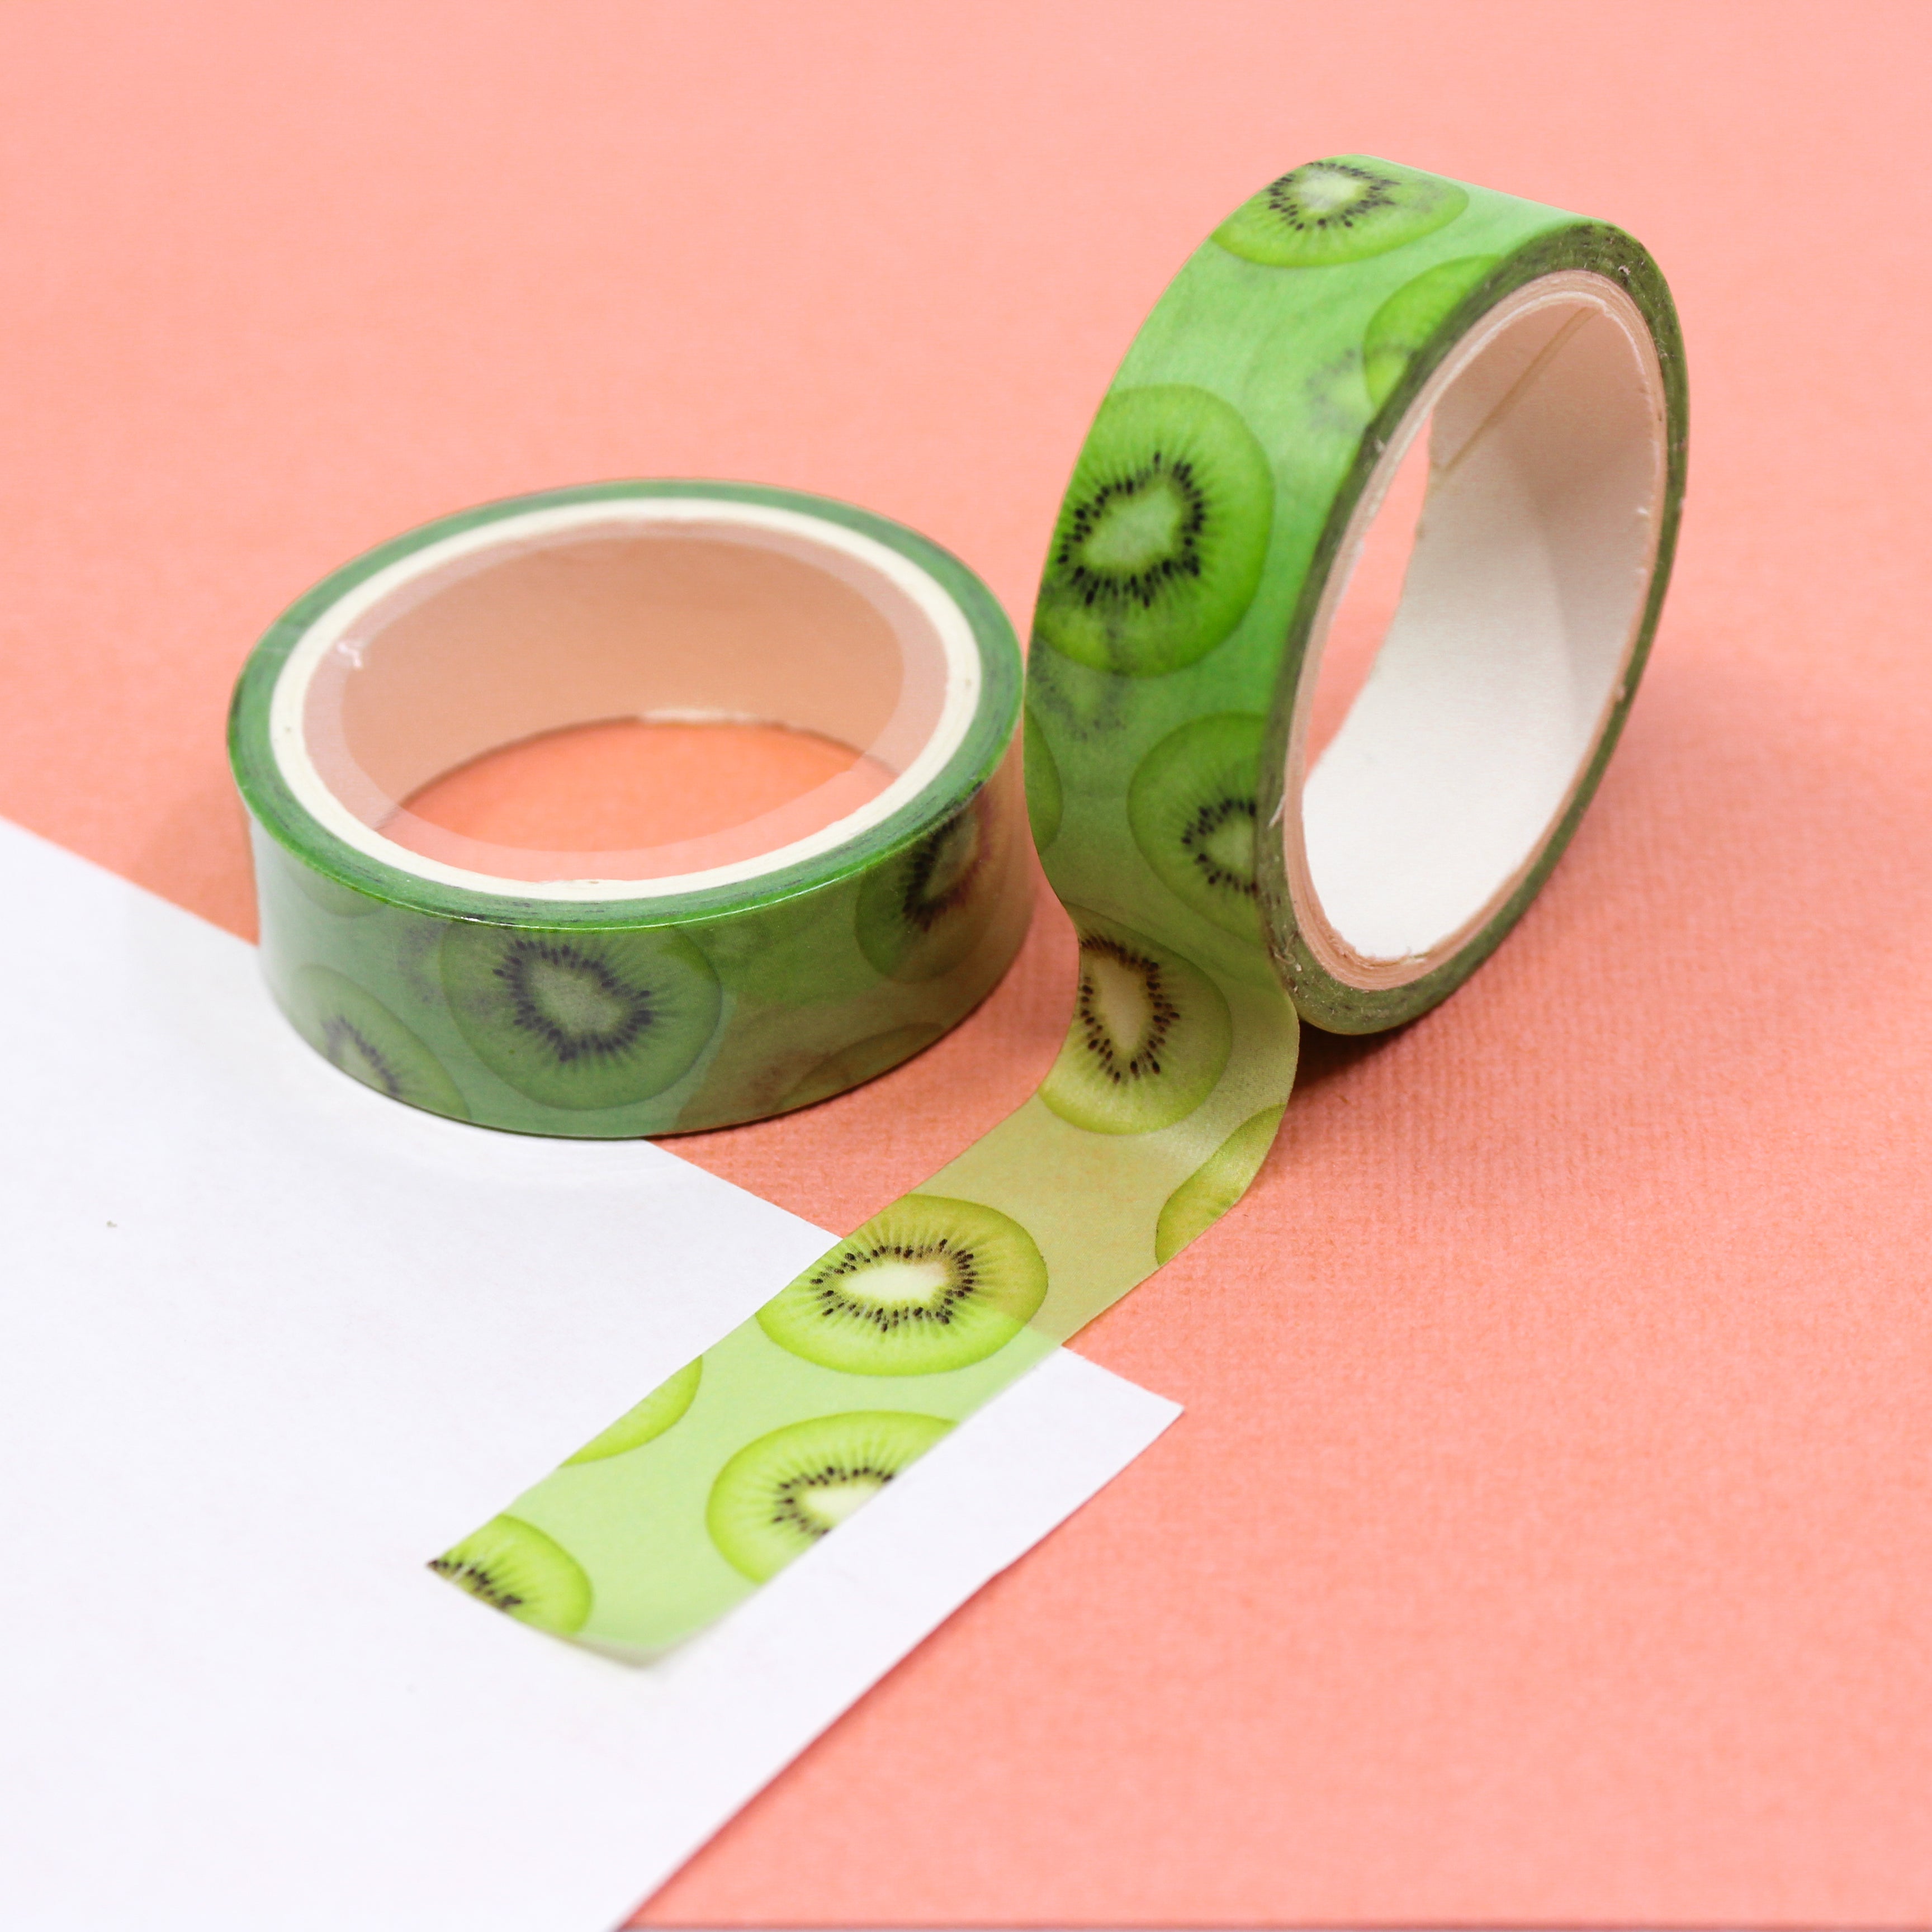 This is green kiwi fruits view themed washi tape from BBB Supplies Craft Shop